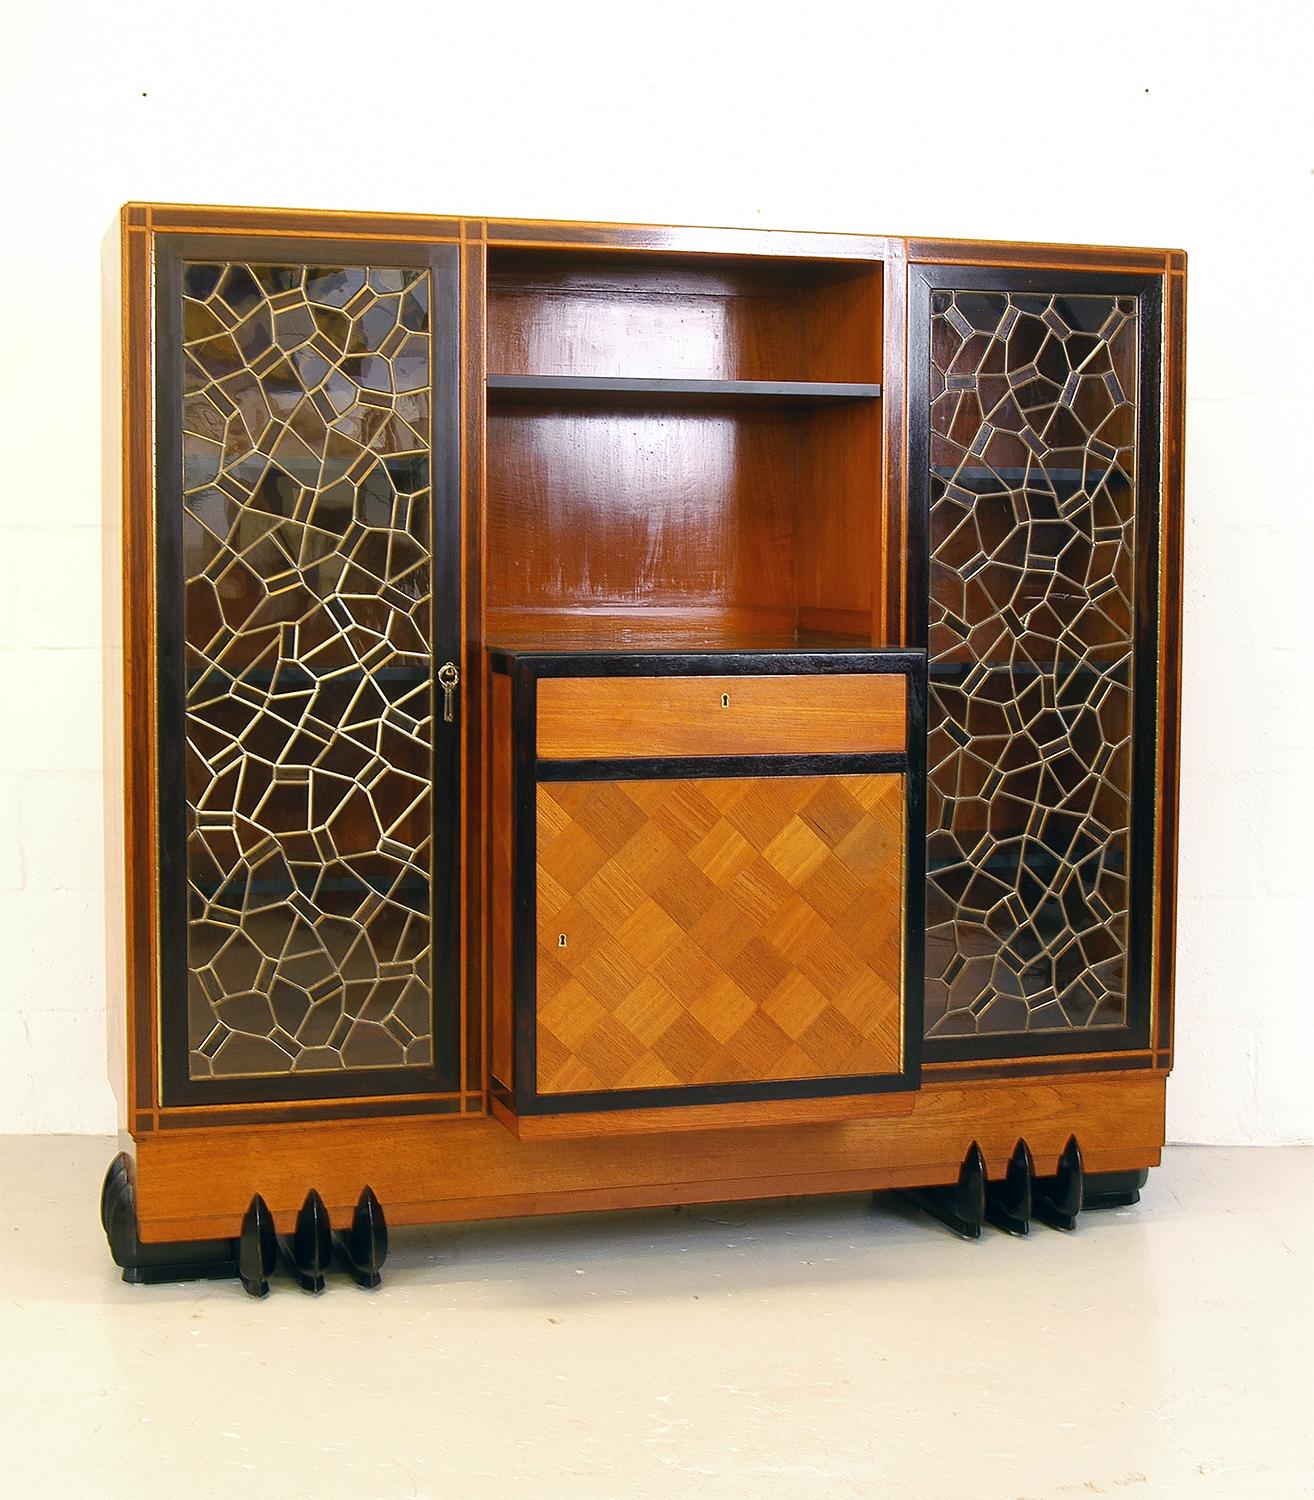 Unusual early 20th century breakfront buffet. Constructed entirely from teak and ebony, and standing on a pair of outrageous ‘clawed’ feet, with full height ebony inlay down each side.
The fabulous leaded mosaic doors are made from glass and ebony